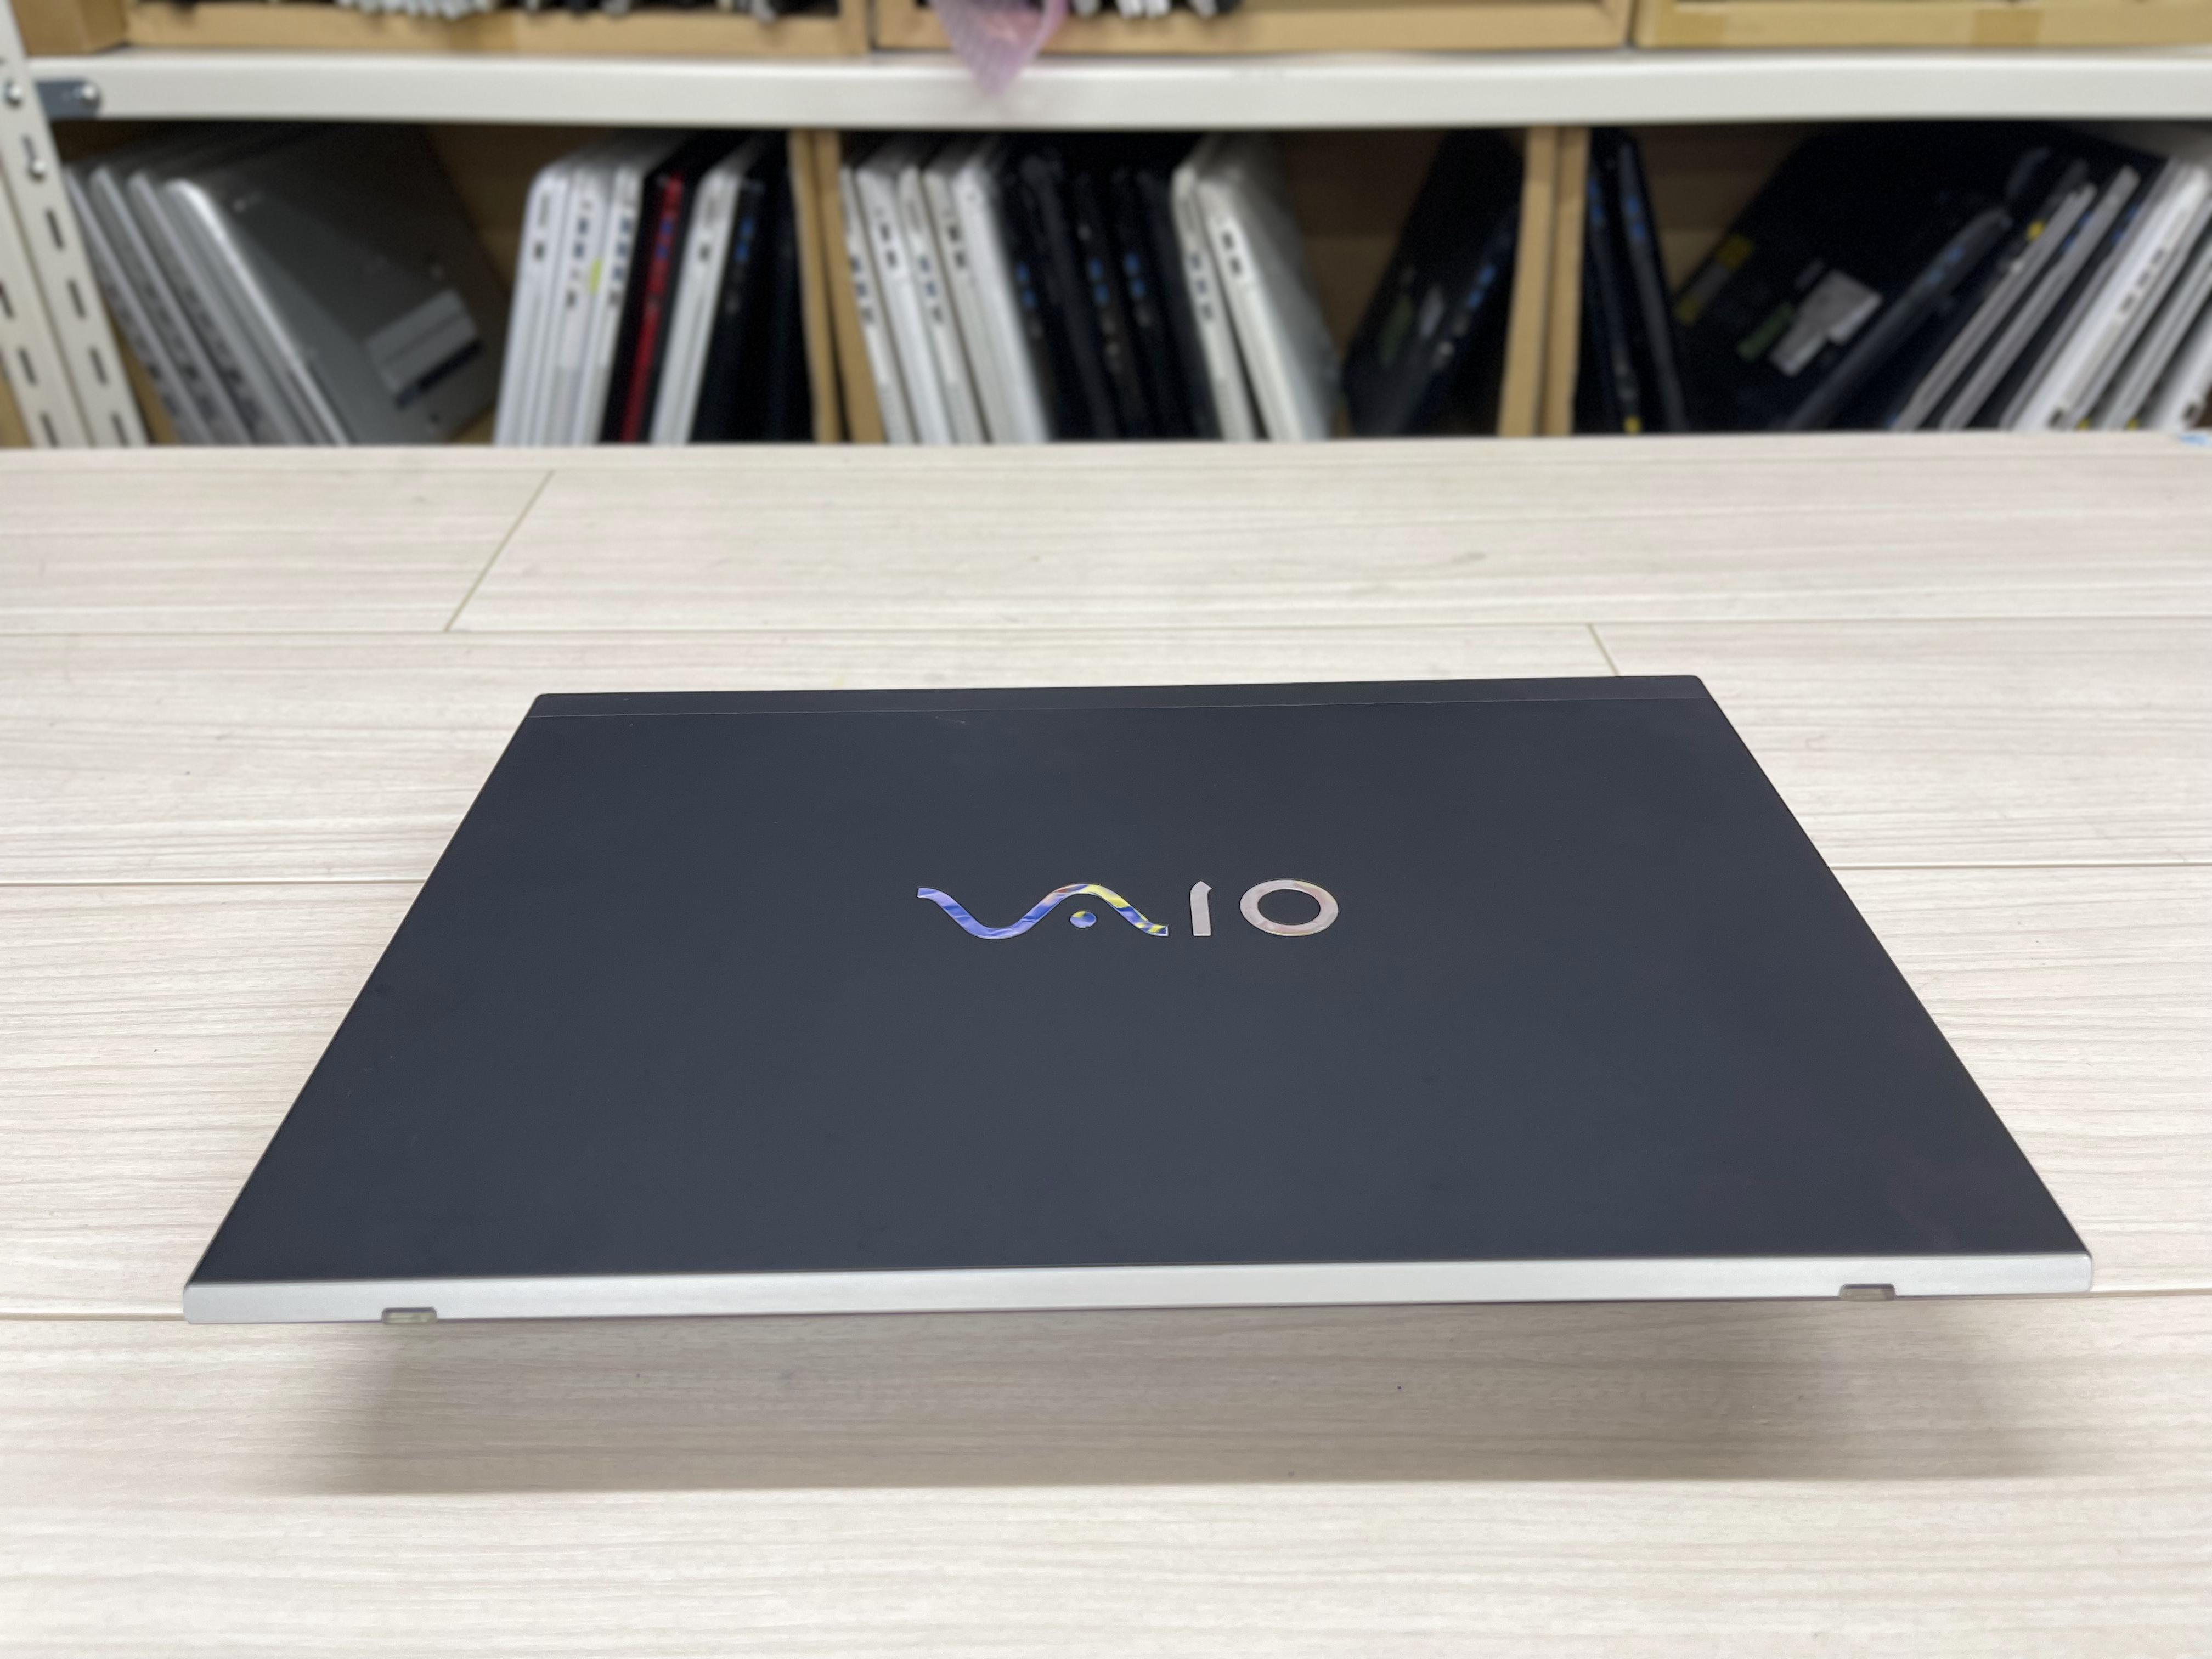 SONY Vaio VJPG11 13inch / model 2017 / Made in Japan / Full HD / Core i5 / 7200U / 2.50-2.71GHz / Ram 4G / Ổ  SSD 128G / Win 10Pro Tiếng Việt. MS:20220525 2870